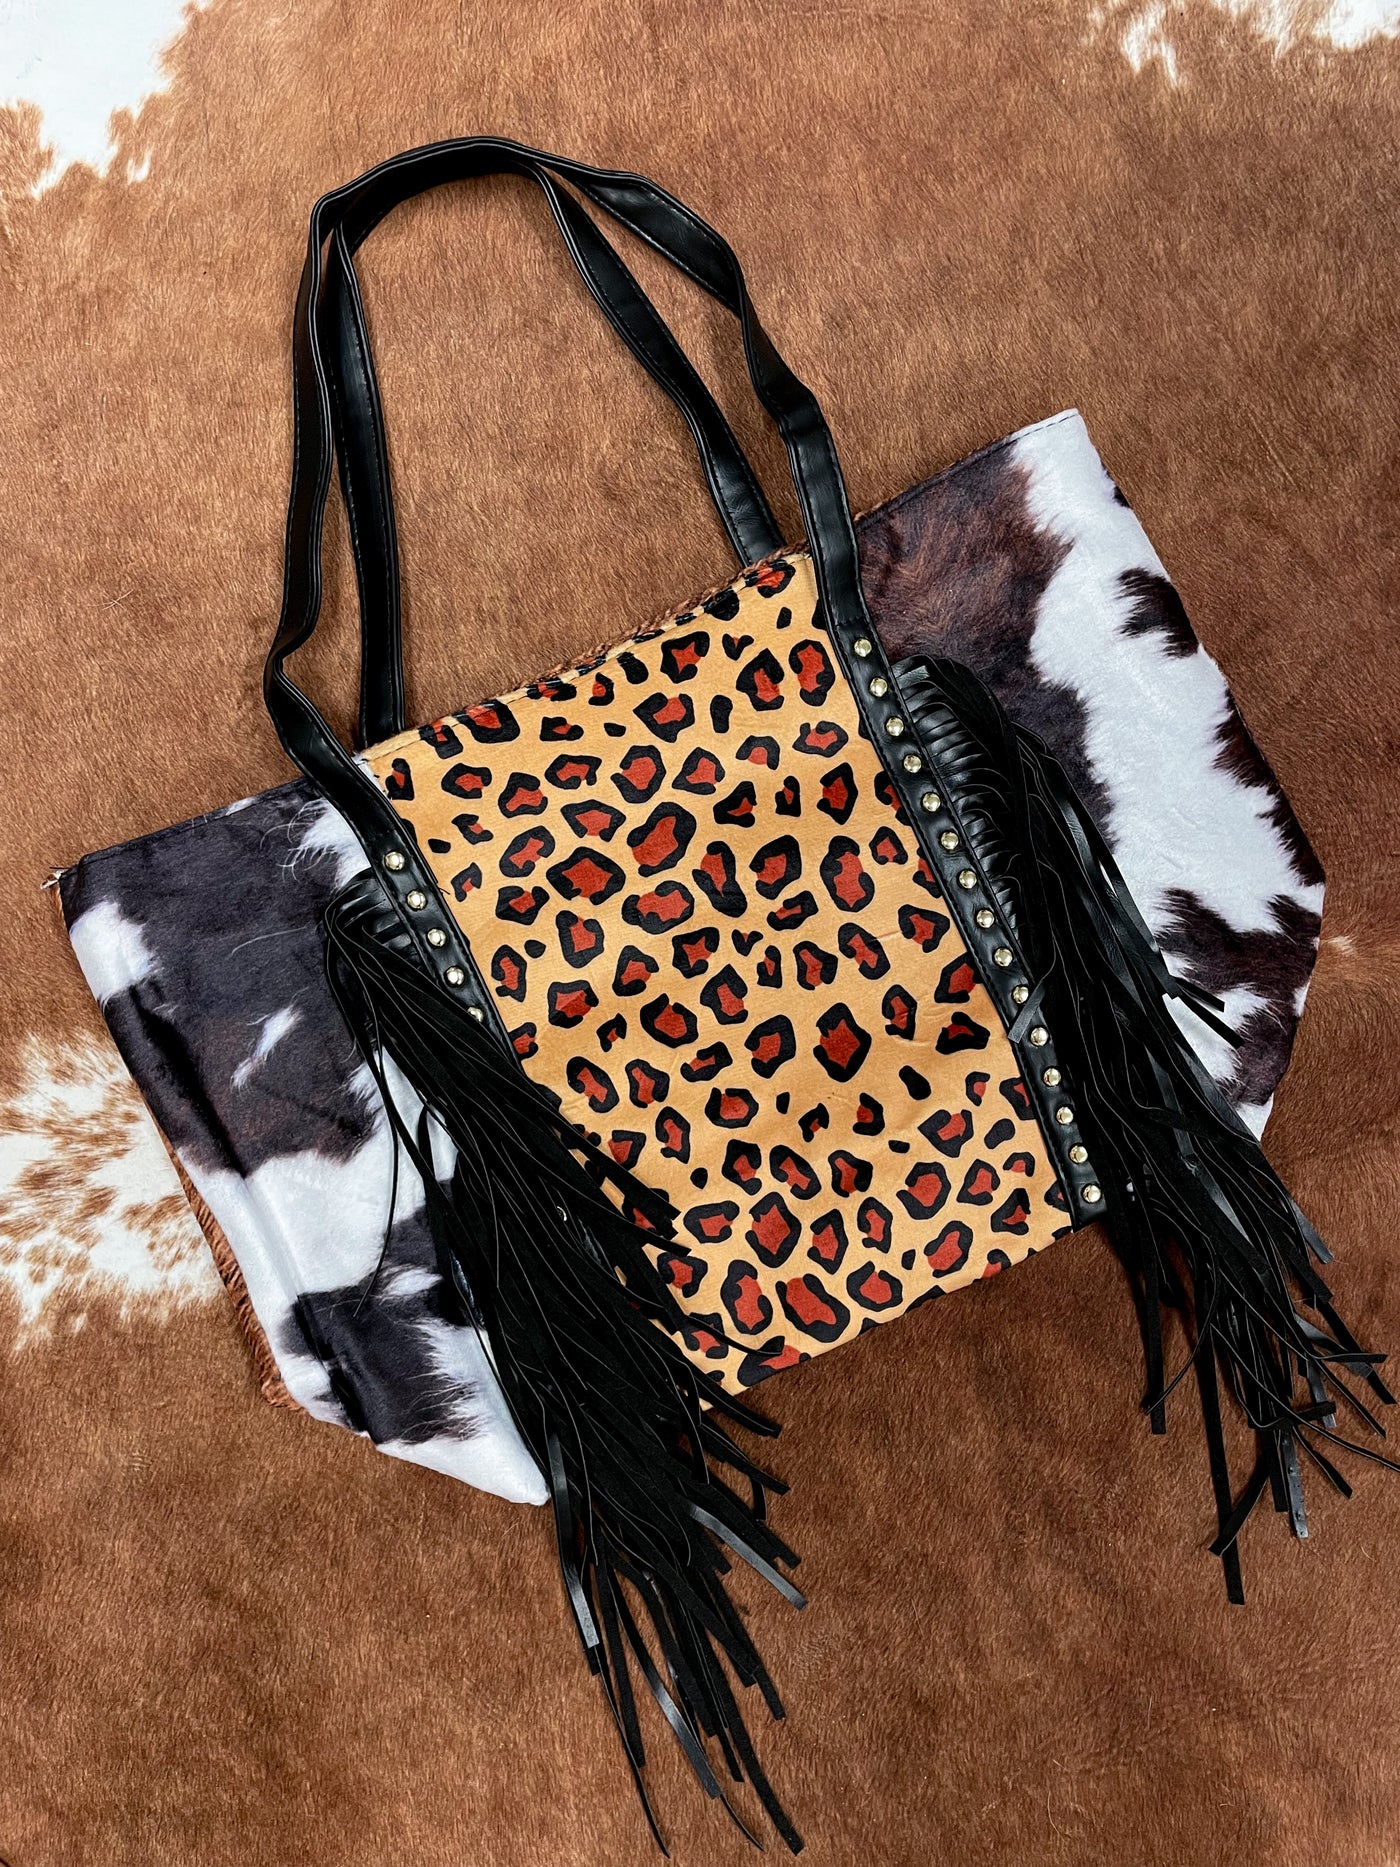 "Late to the Party" Fringe Handbag [Choose from Sunflower or Leopard Print]